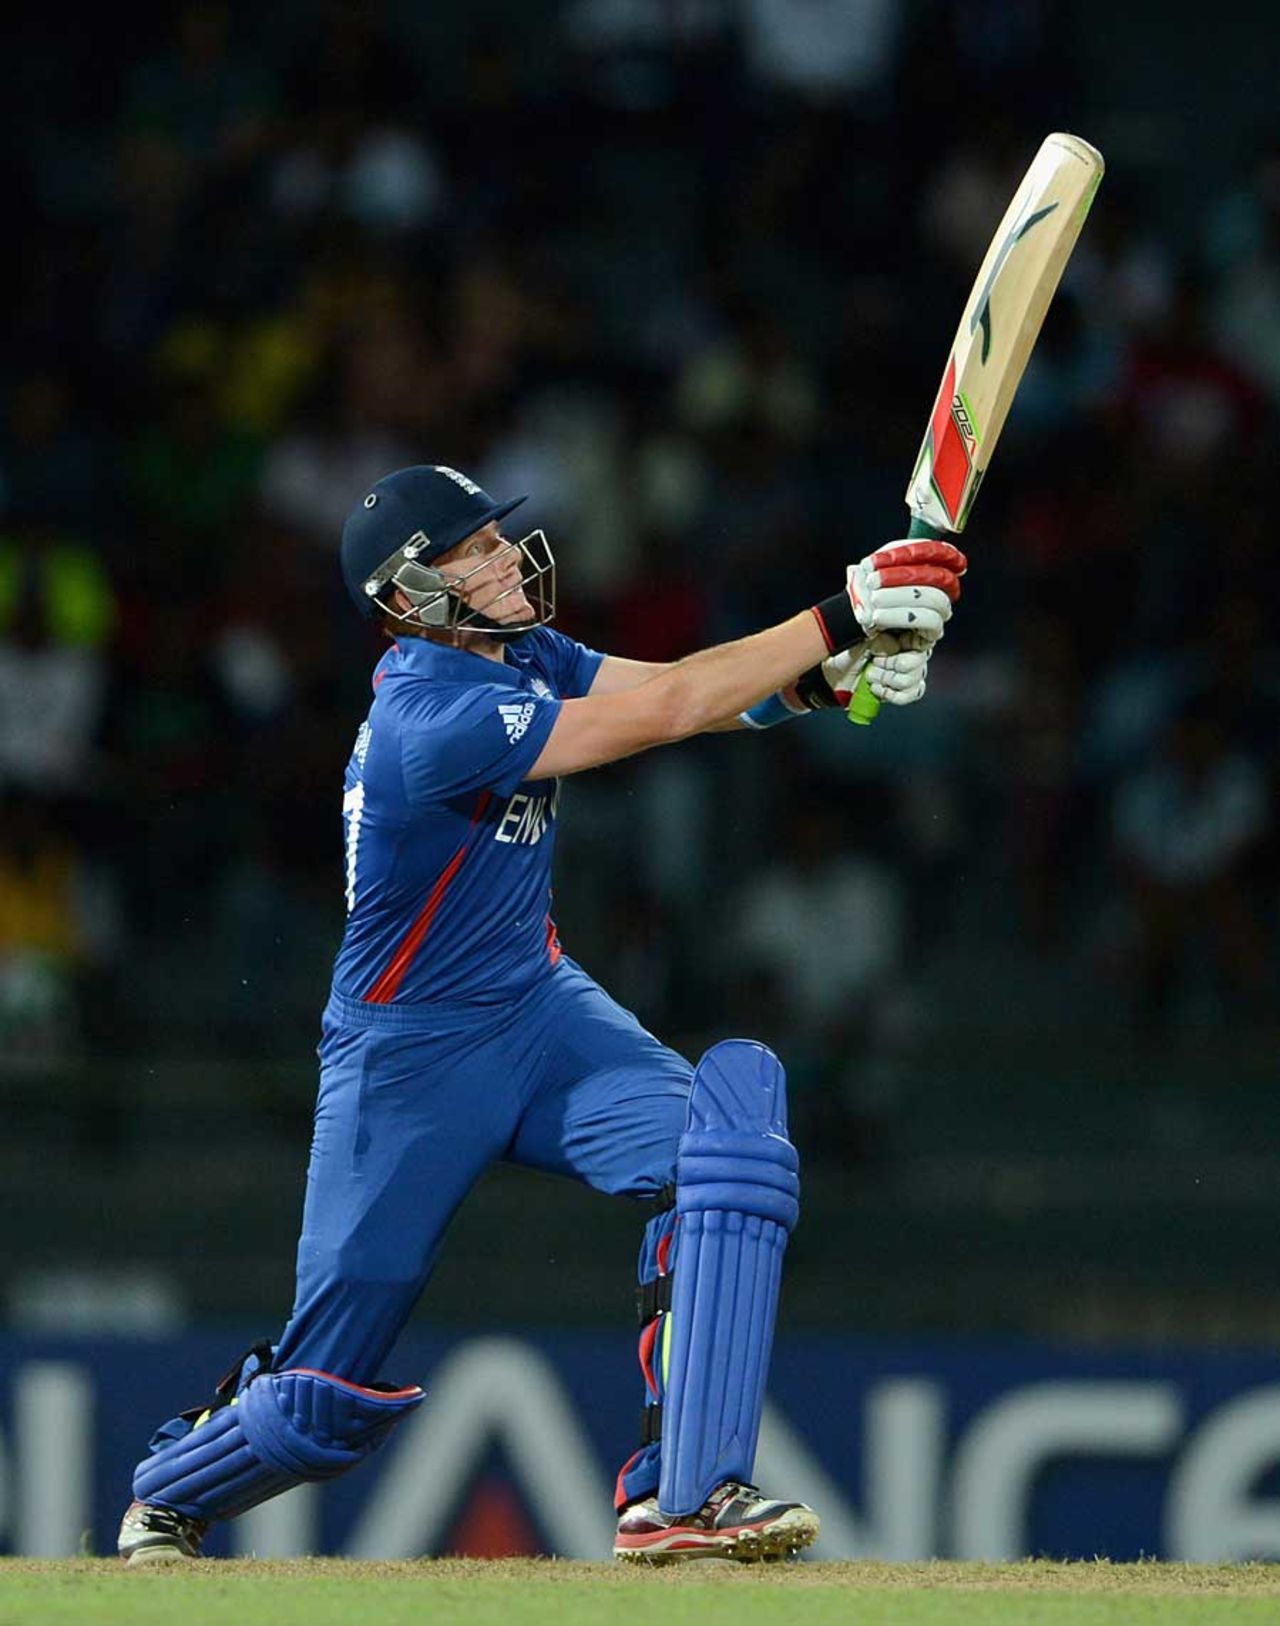 Jonny Bairstow struck his first ball into the stands, Afghanistan v England, World Twenty20 2012, Group A, Colombo, September 21, 2012